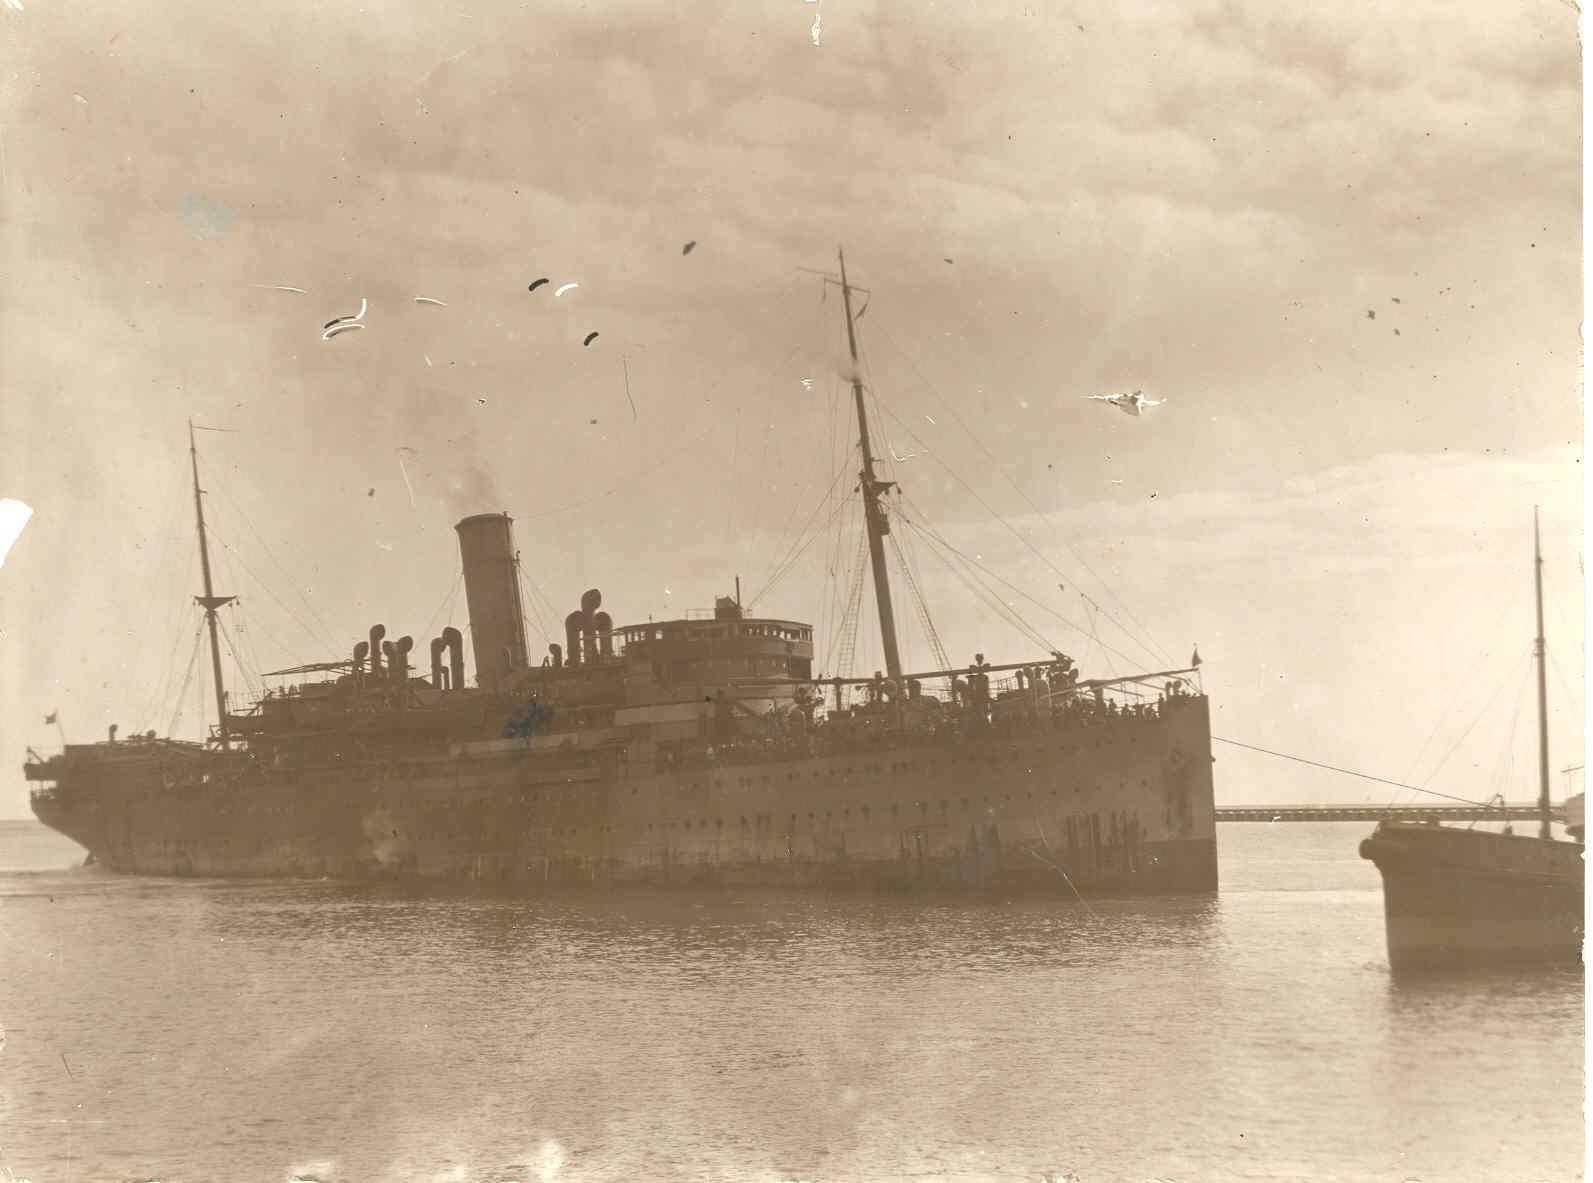 Built in 1913 by Alexander Stephen & Sons, Glasgow and first owned by Howard Smith Co, operated between Melbourne and Cairns.  In 1917 she was commandeered as a troop ship and returned to Howard Smith in 1919 where she operated as a cargo ship for two mon